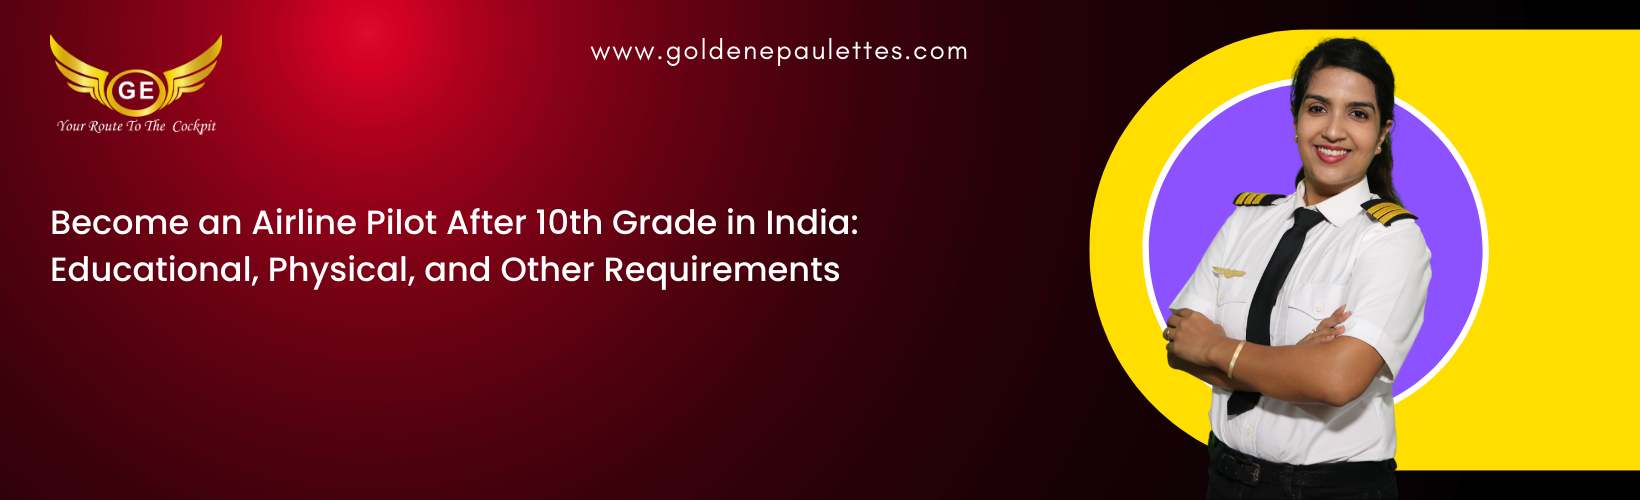 What Are the Requirements to Become an Airline Pilot After 10th Grade in India